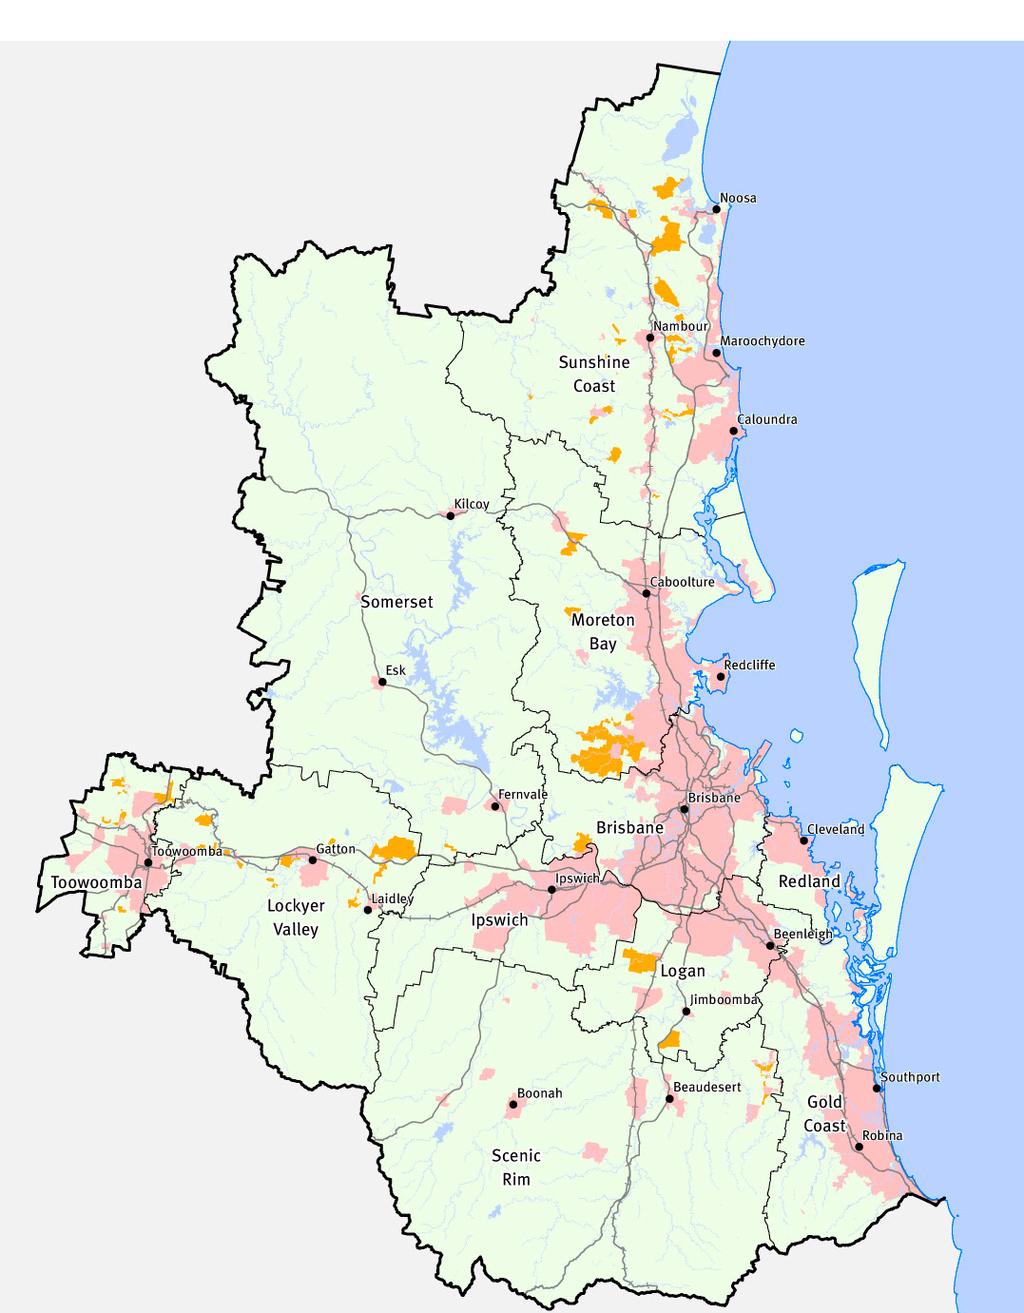 Introduction Figure 1: Map of SEQ region Key Major road Railway SEQ boundary Local government area Waterbody and waterway Regional land